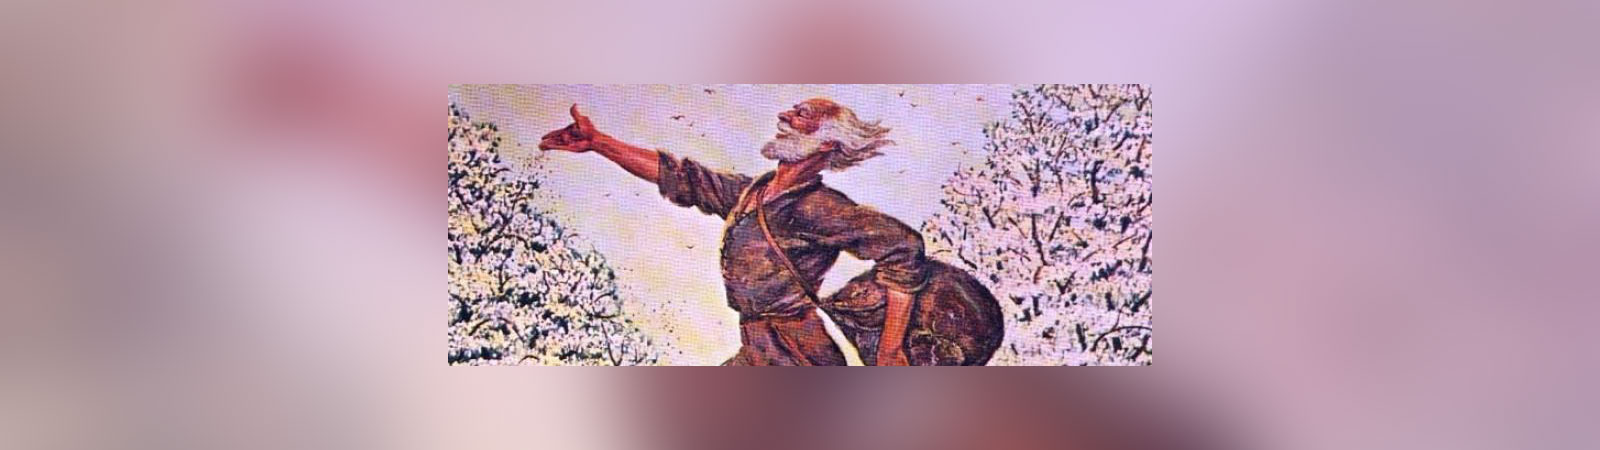 Who Was Johnny Appleseed?